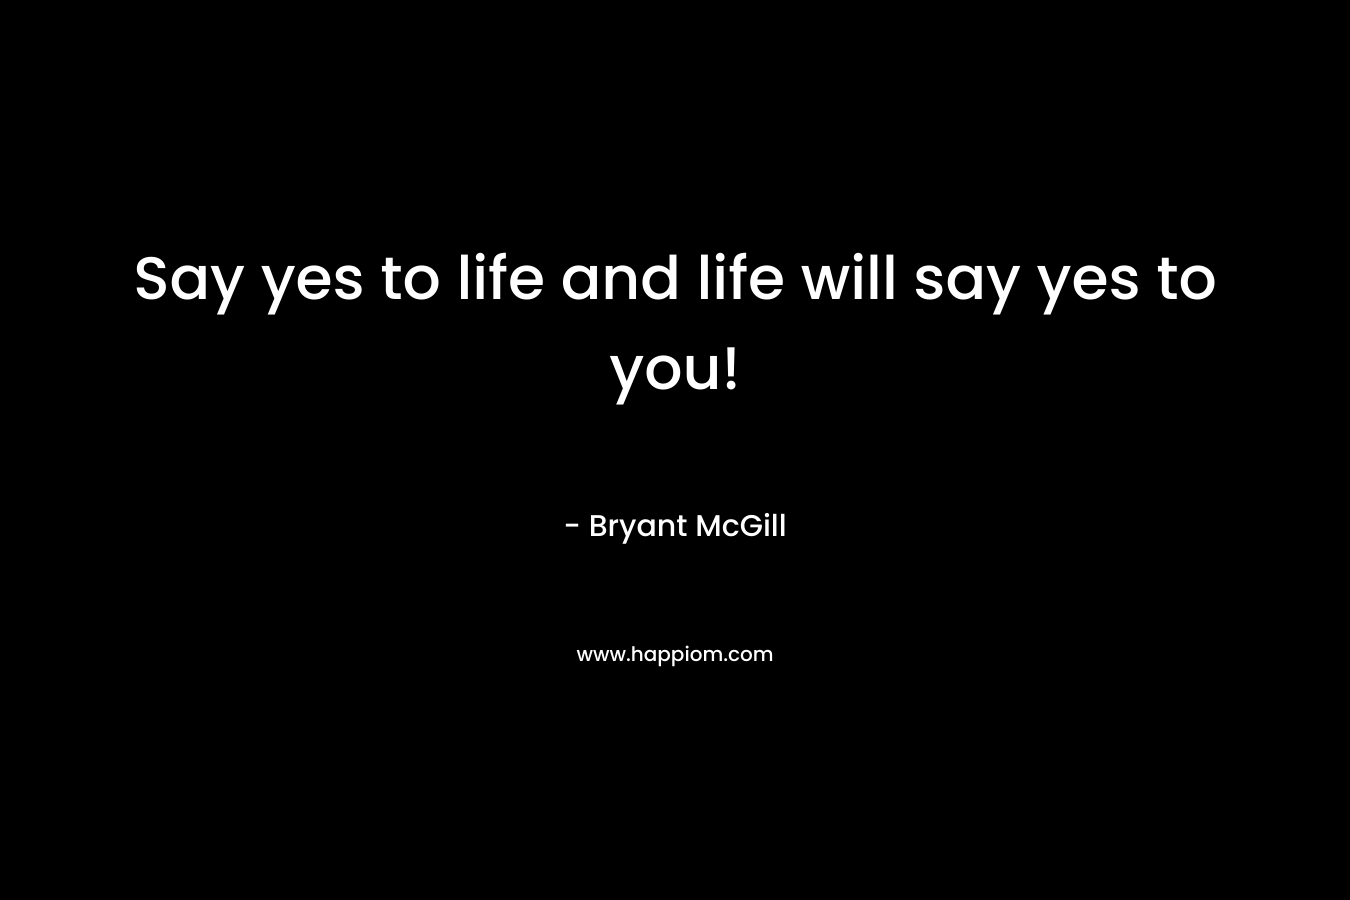 Say yes to life and life will say yes to you!